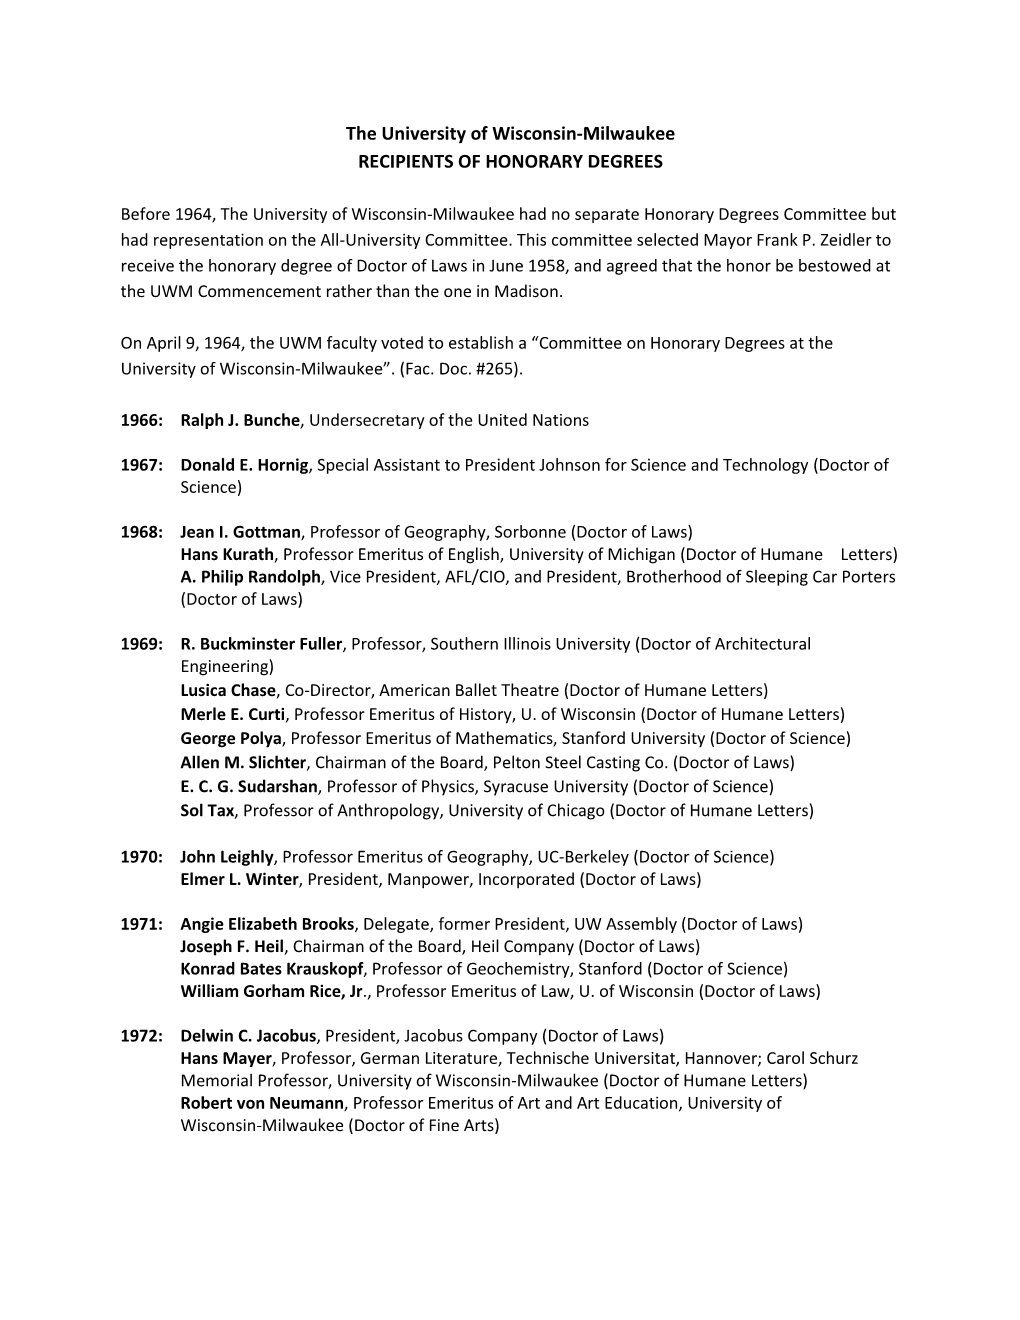 List of Past Honorary Degree Recipients